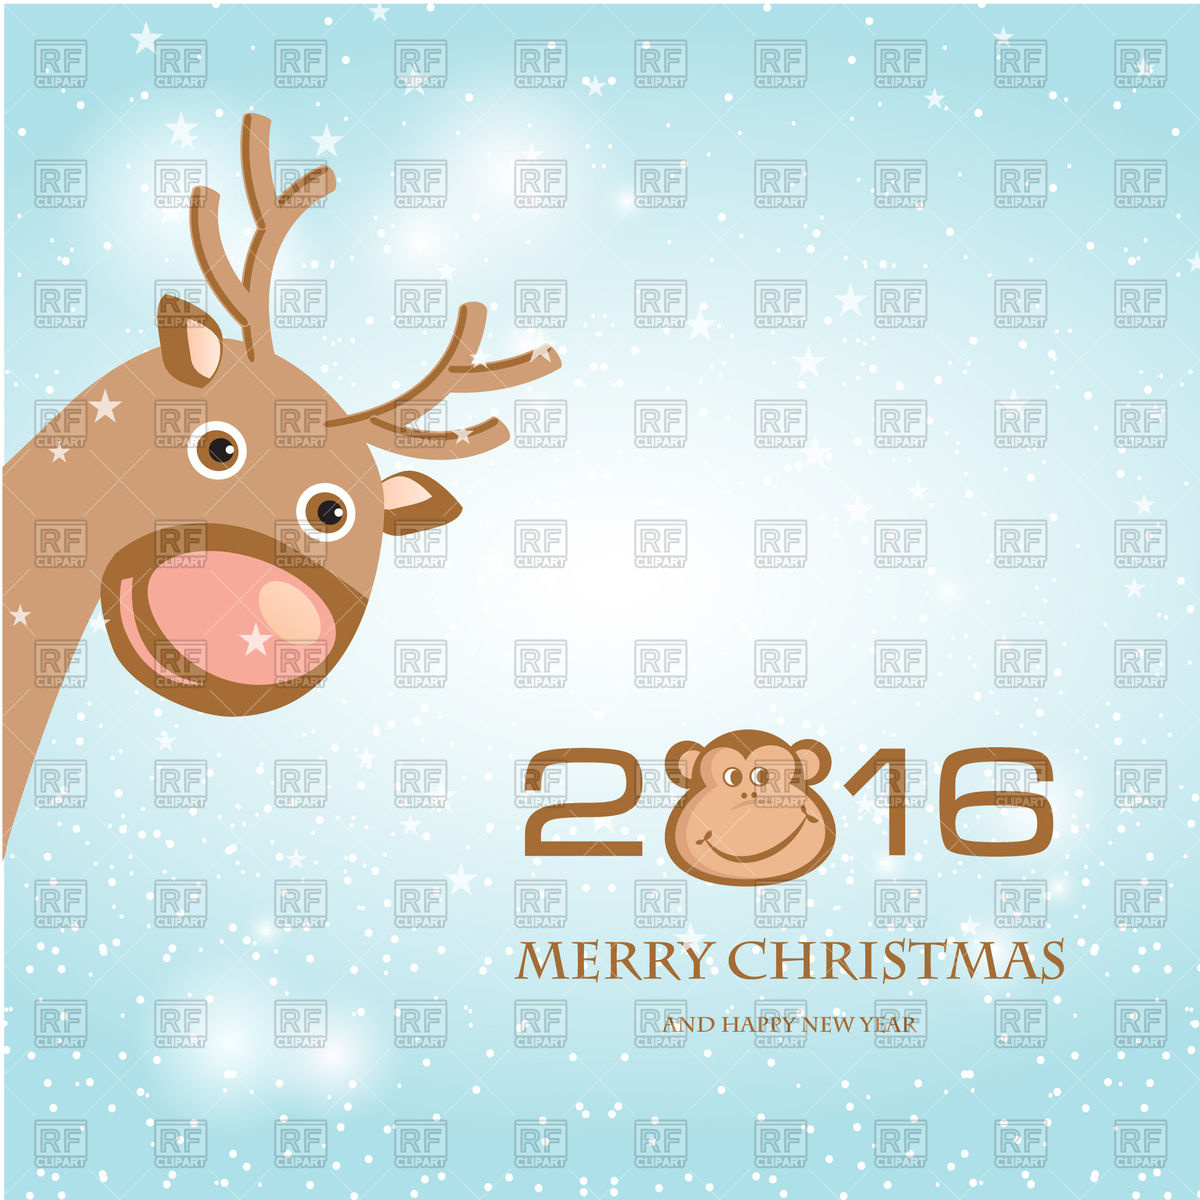 Christmas Card With Cute Reindeer And Monkey  Symbol Of 2016 New Year